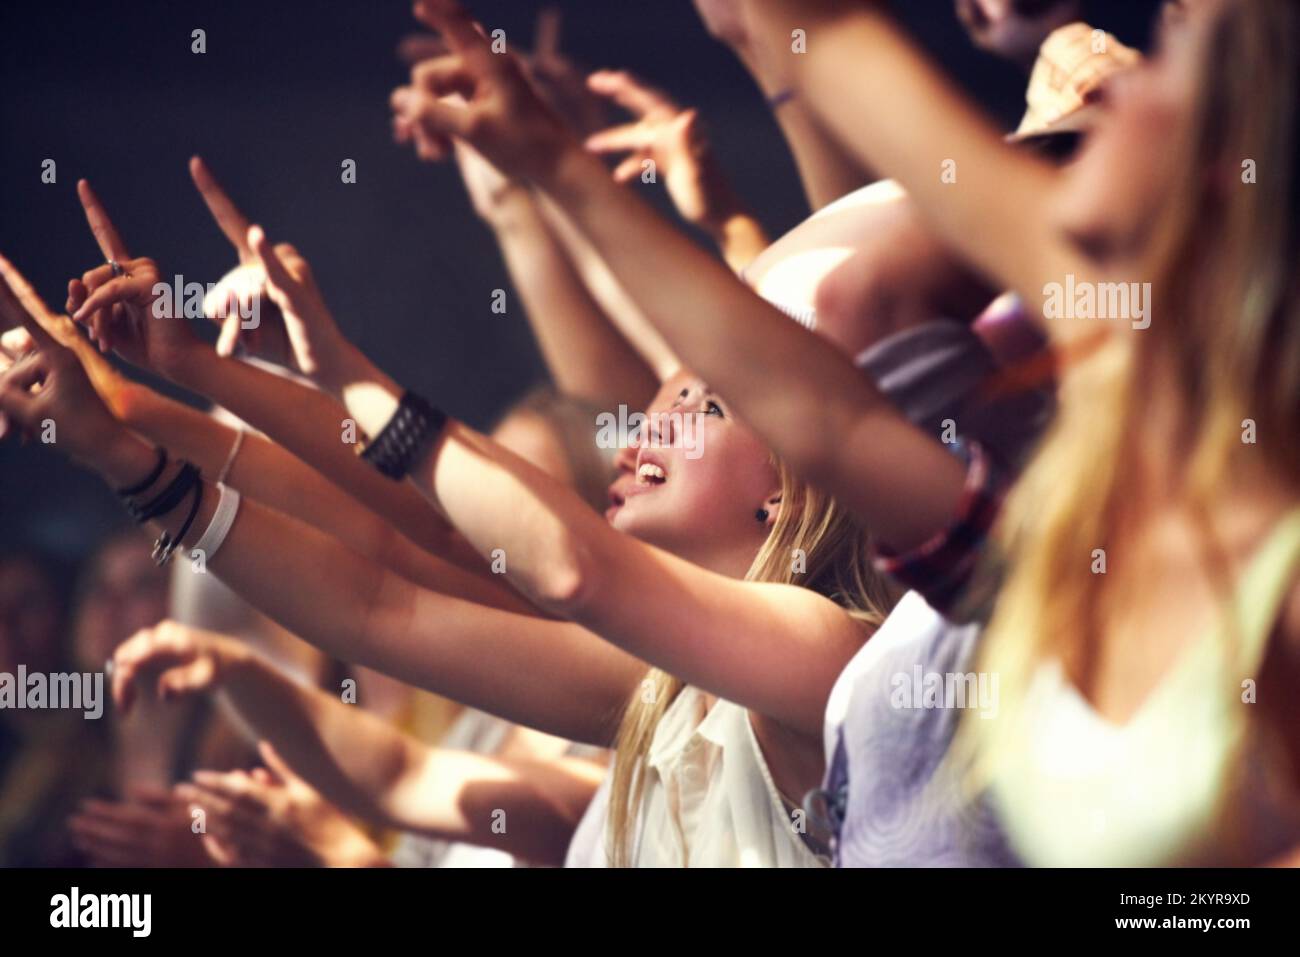 Enjoying the music. A group of people standing with their arms raised at a concert. Stock Photo